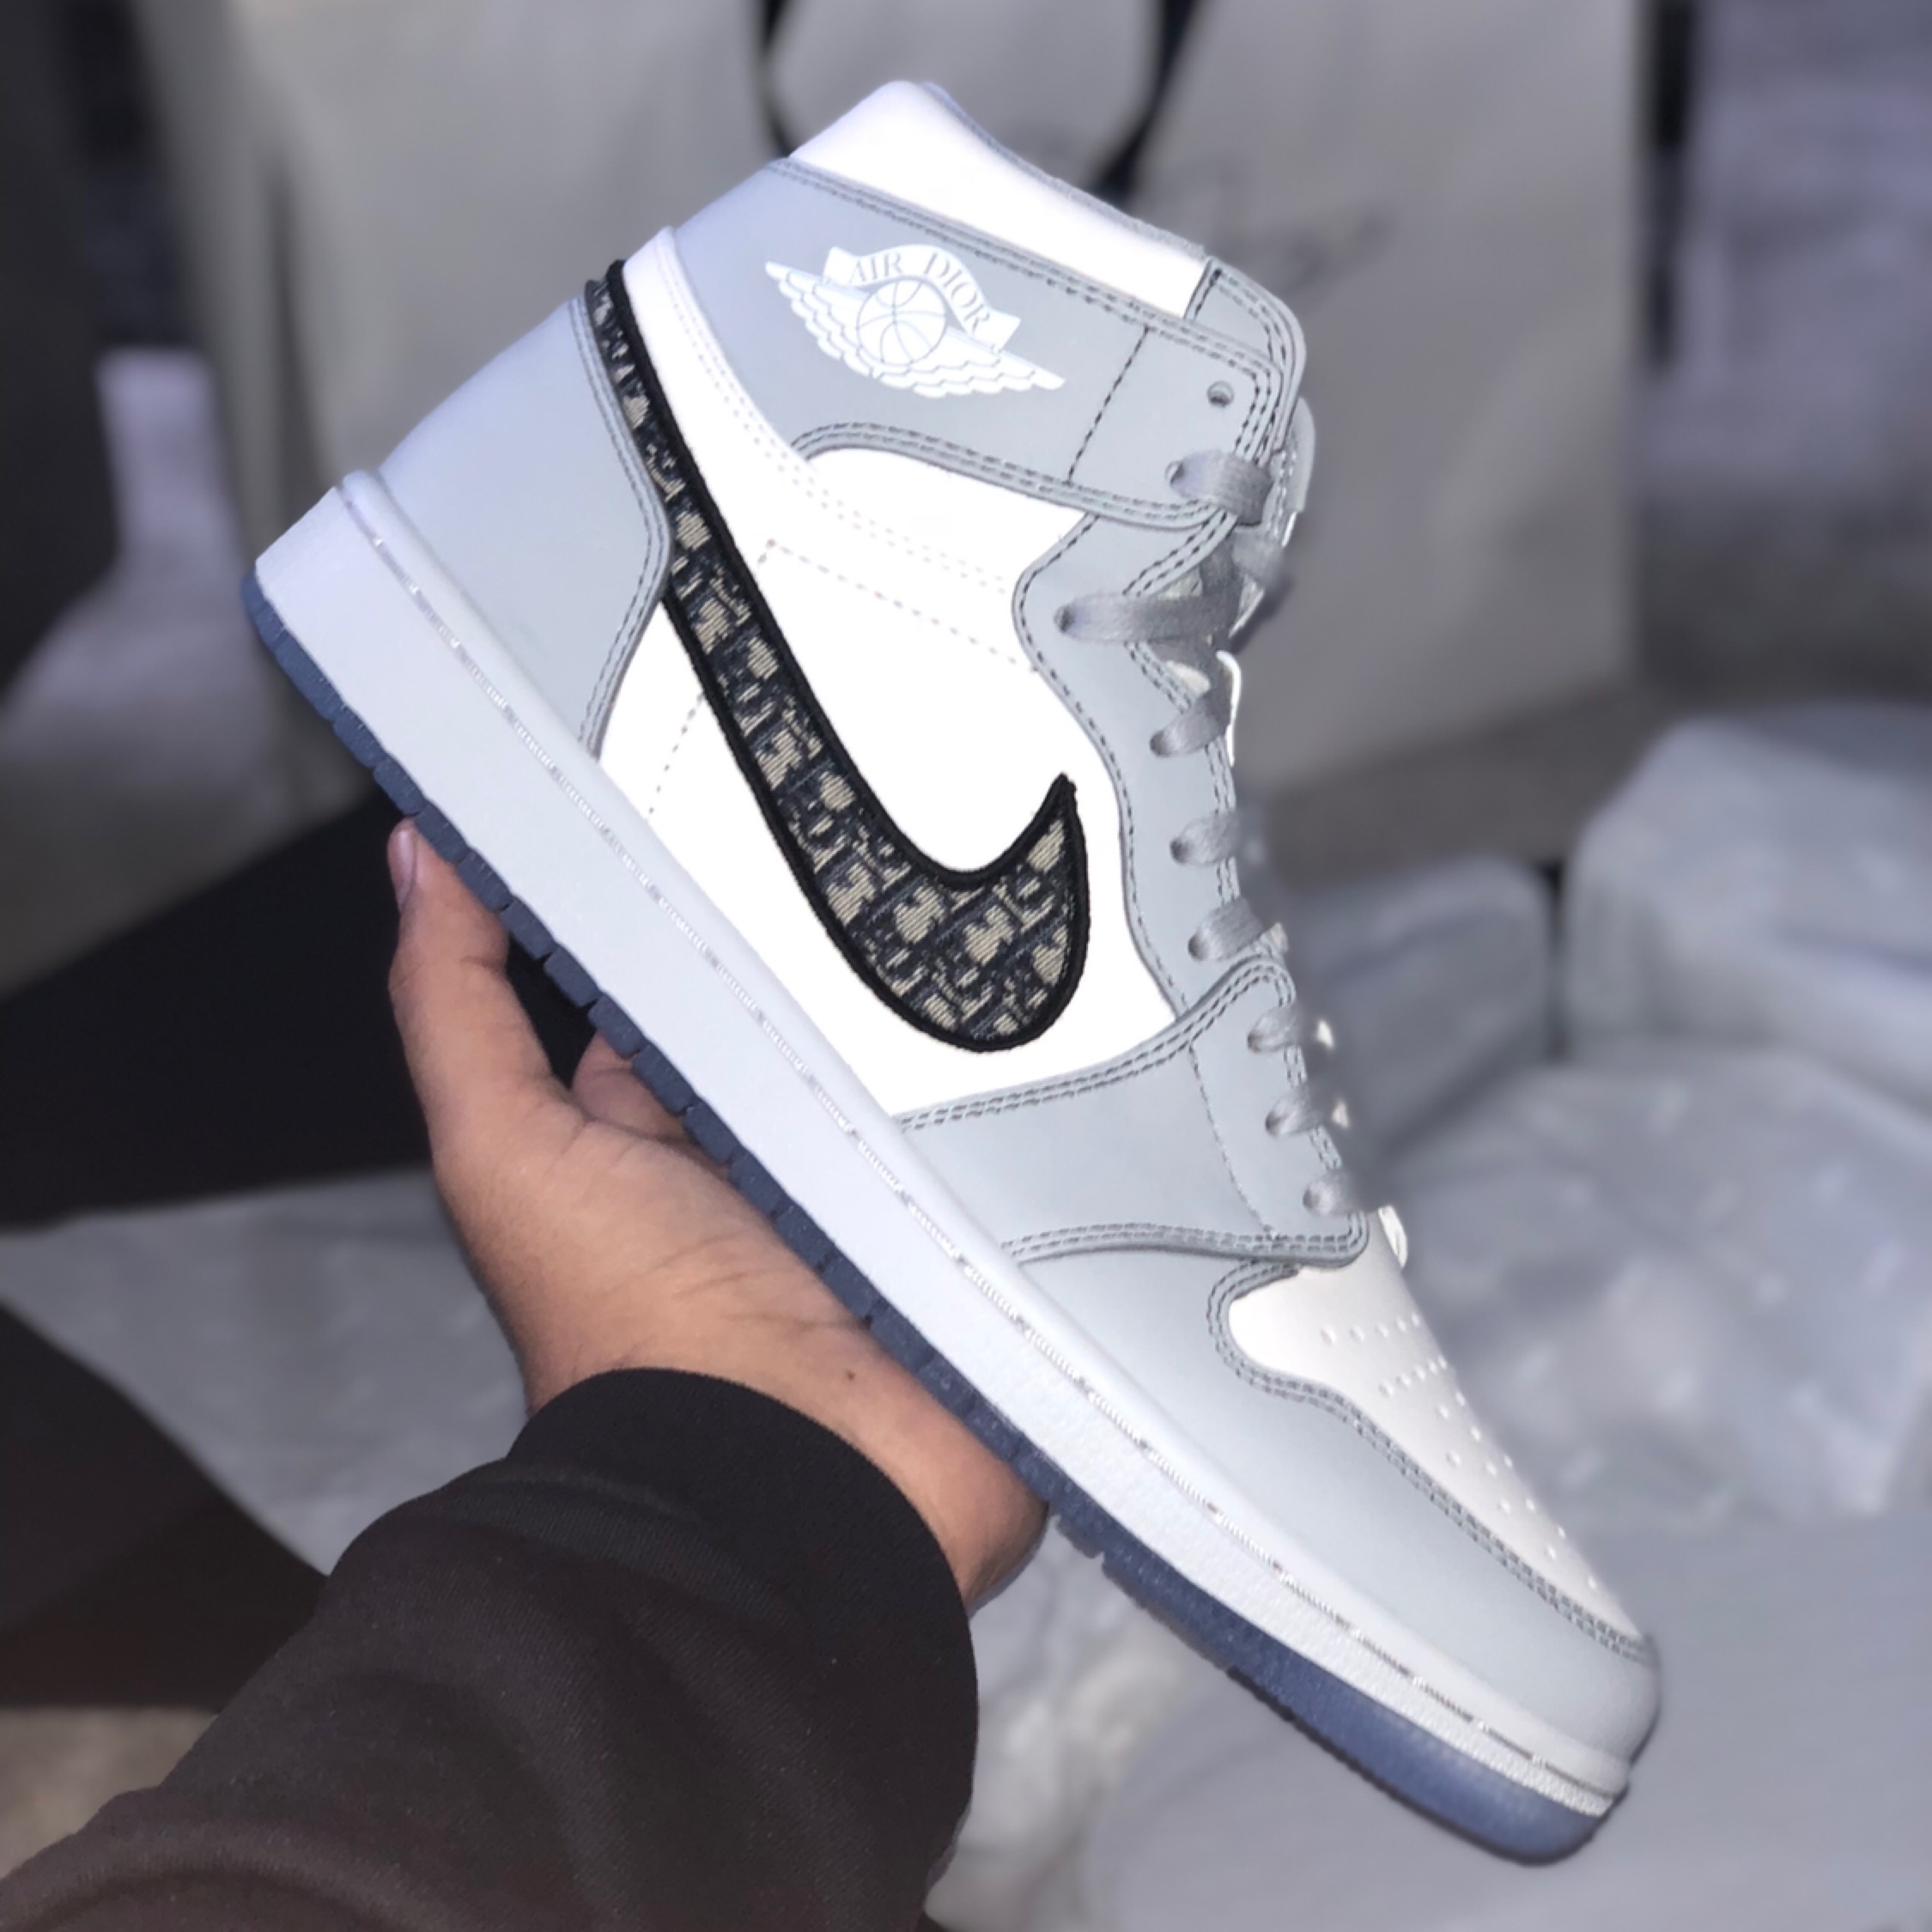 Dior x Air Jordan 1 High Will Be Limited to 8500 and Sold via Lottery   Robb Report